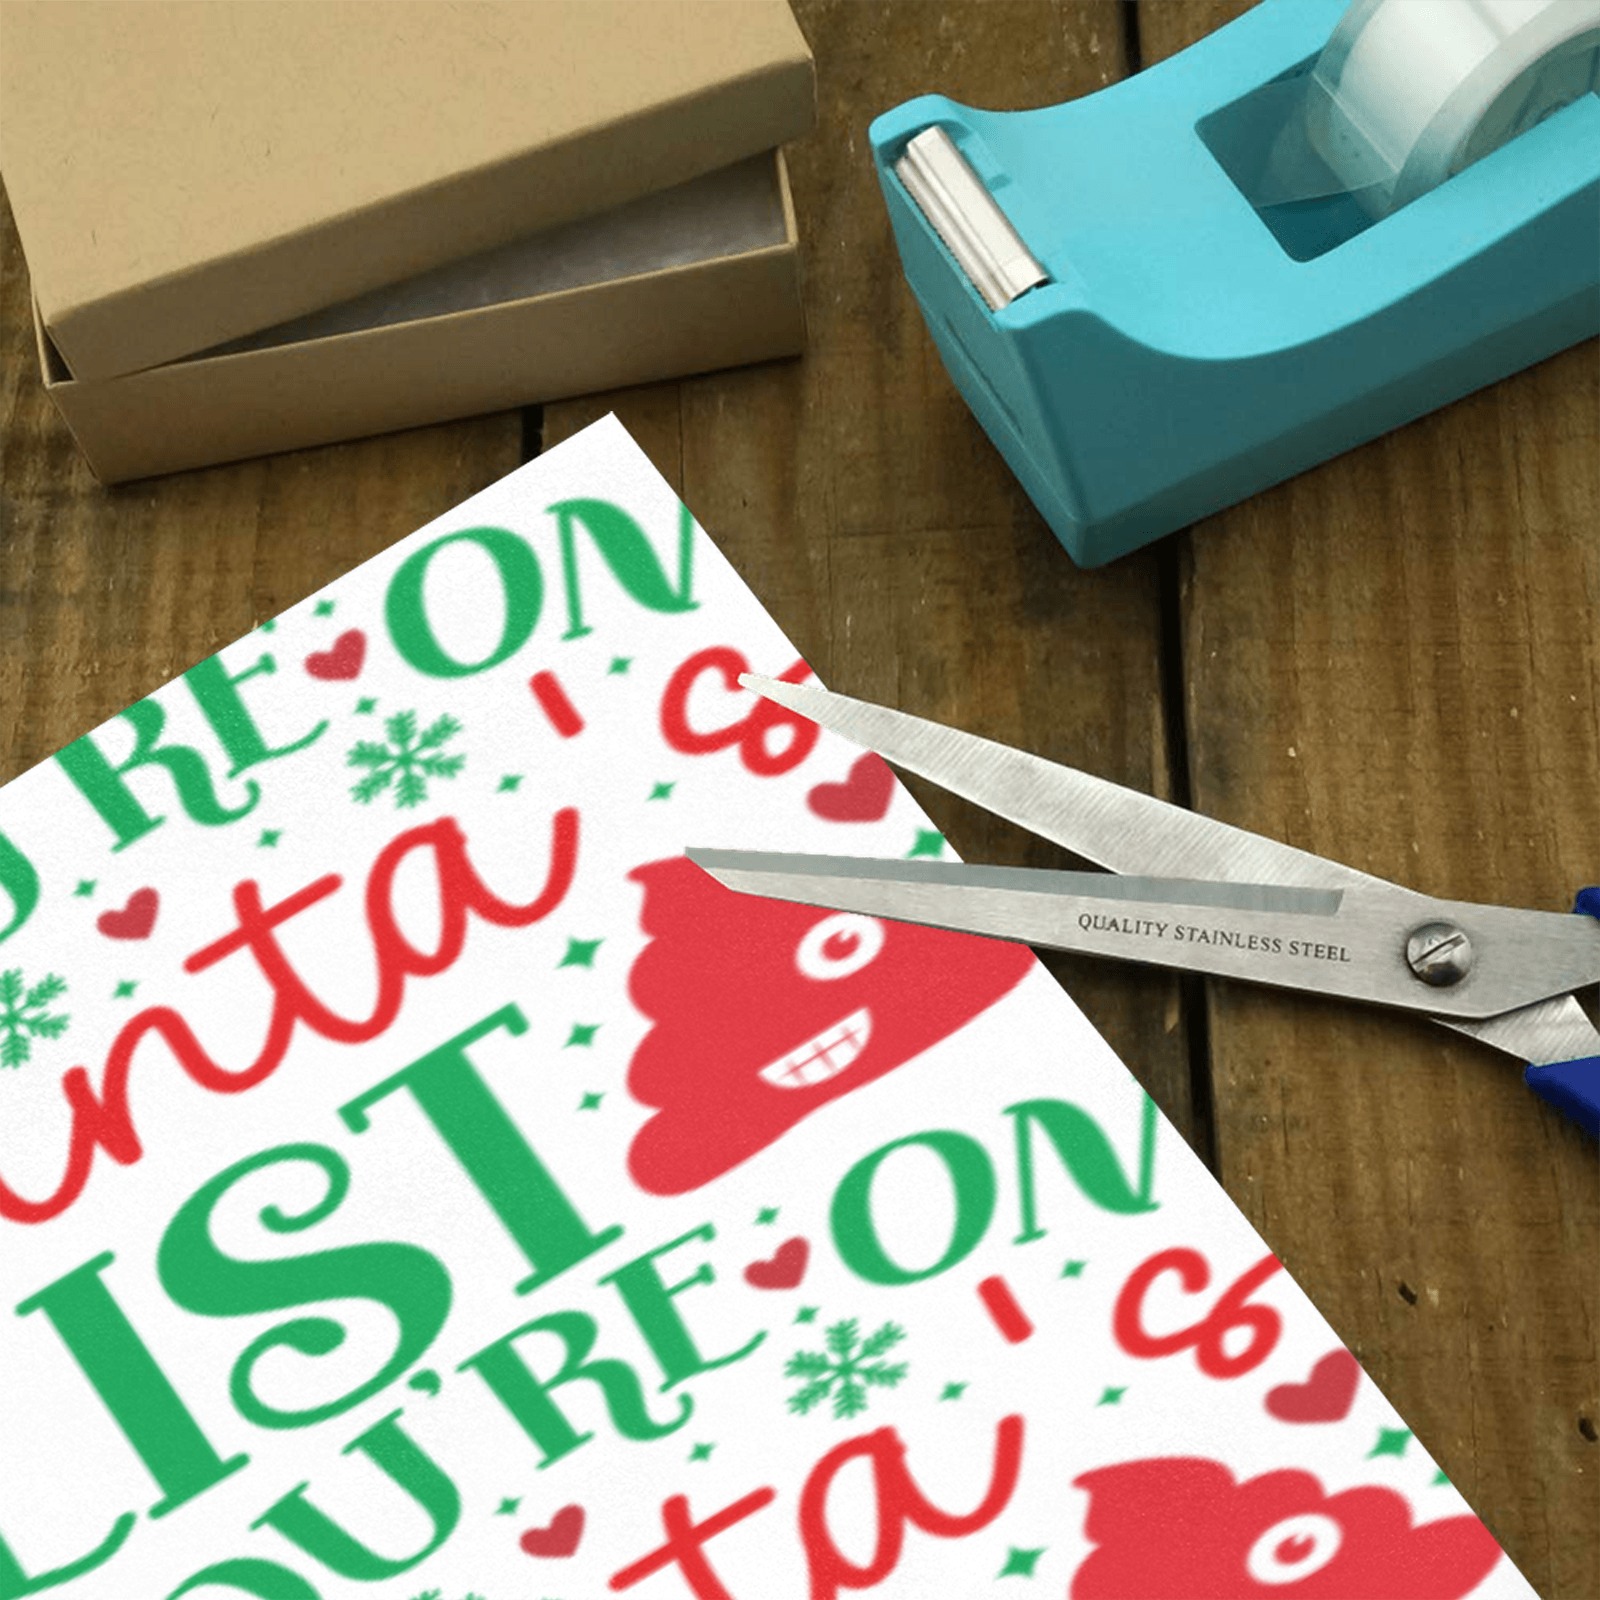 You're on Santa's Shit List Gift Wrapping Paper 58"x 23" (2 Rolls)